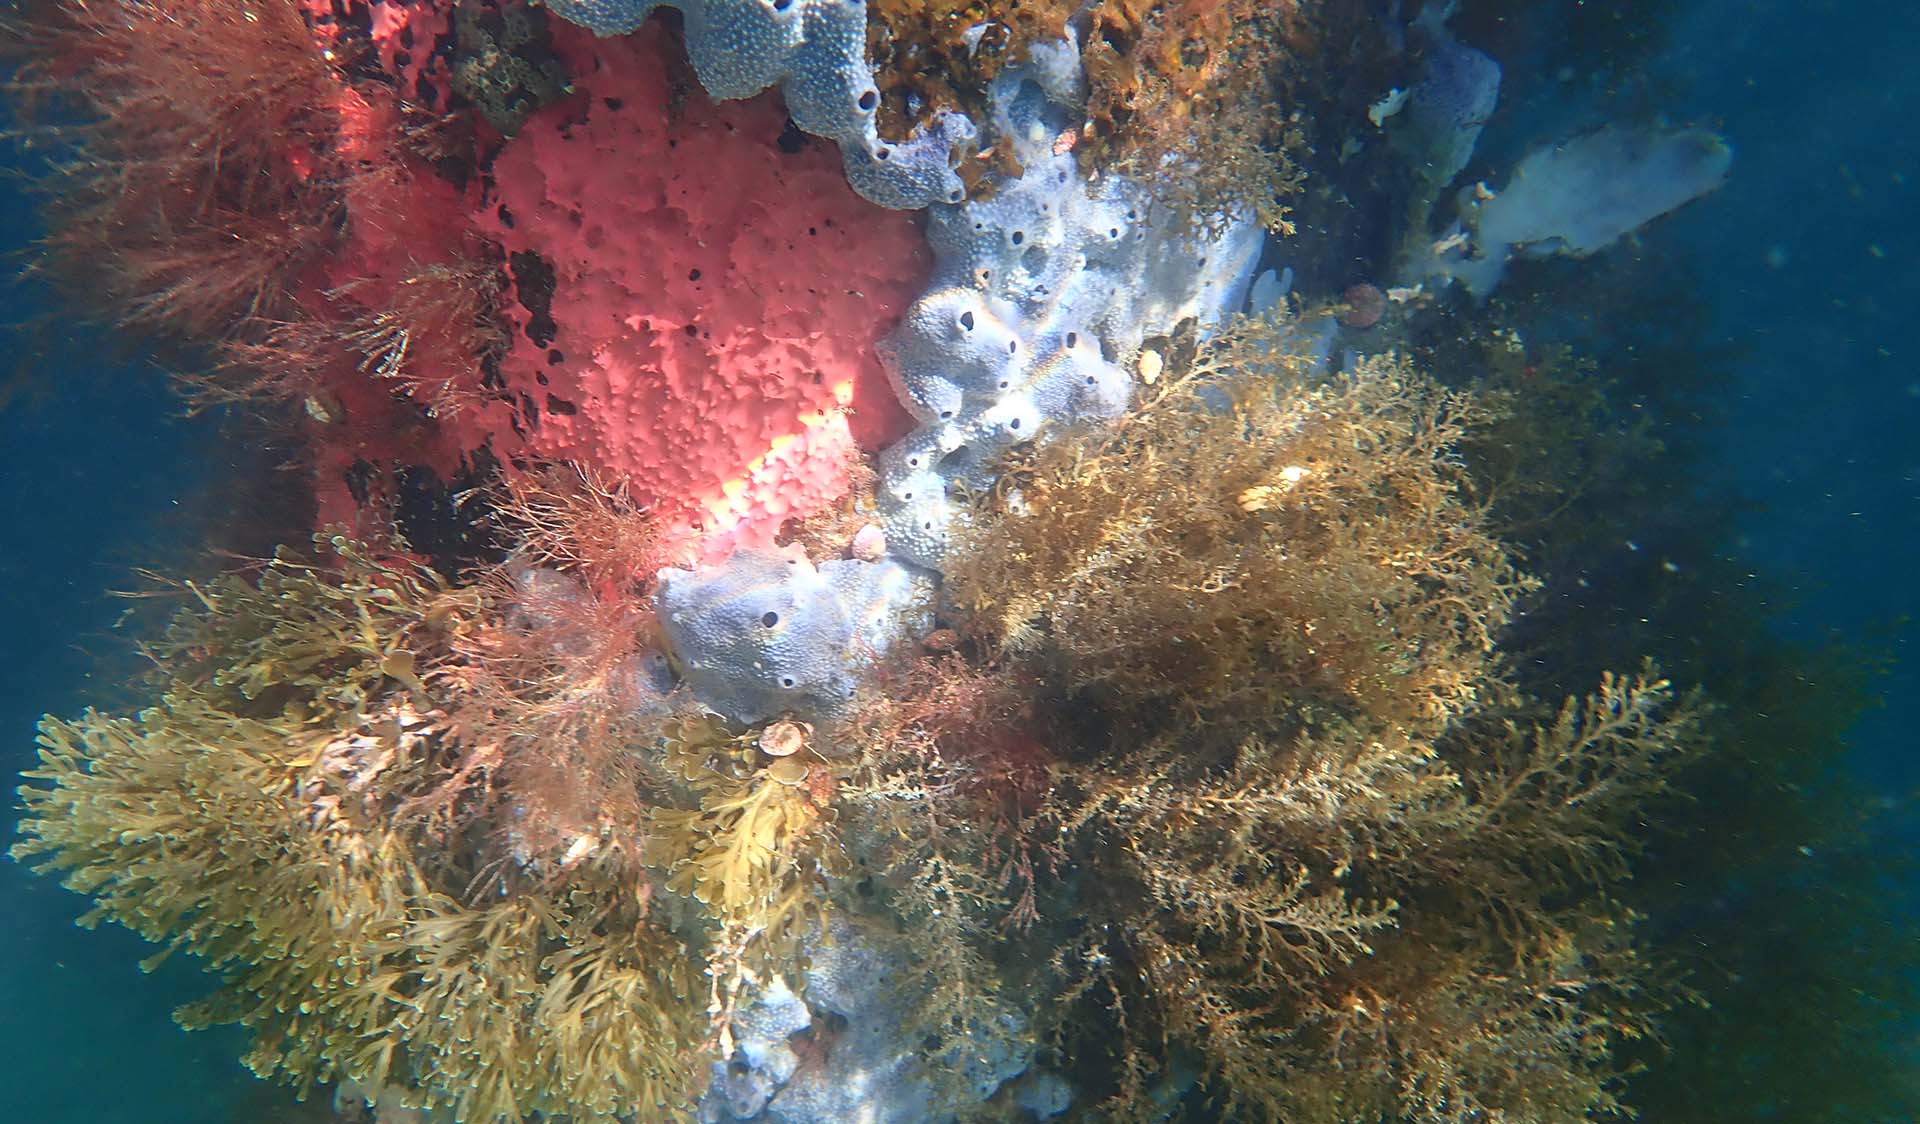 A closeup of coral underwater